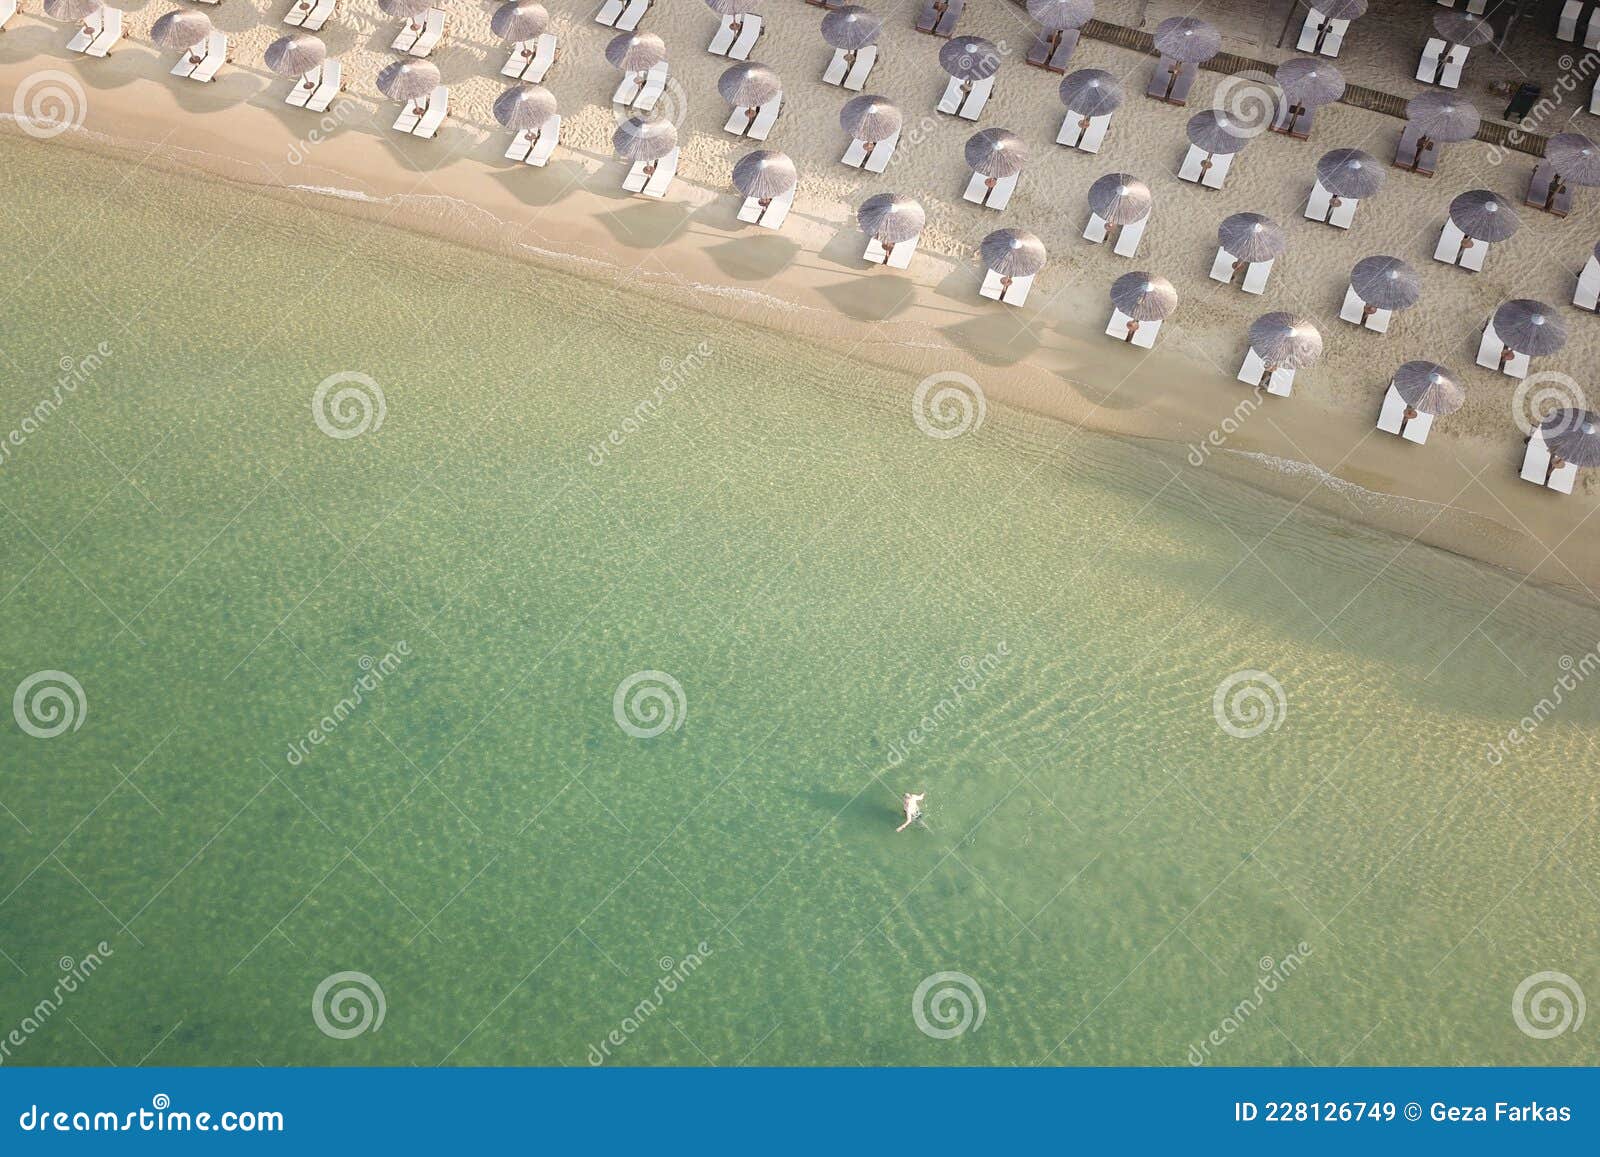 areal view of sandy koukounaries beach, turquoise sea, parasols and sunbeds